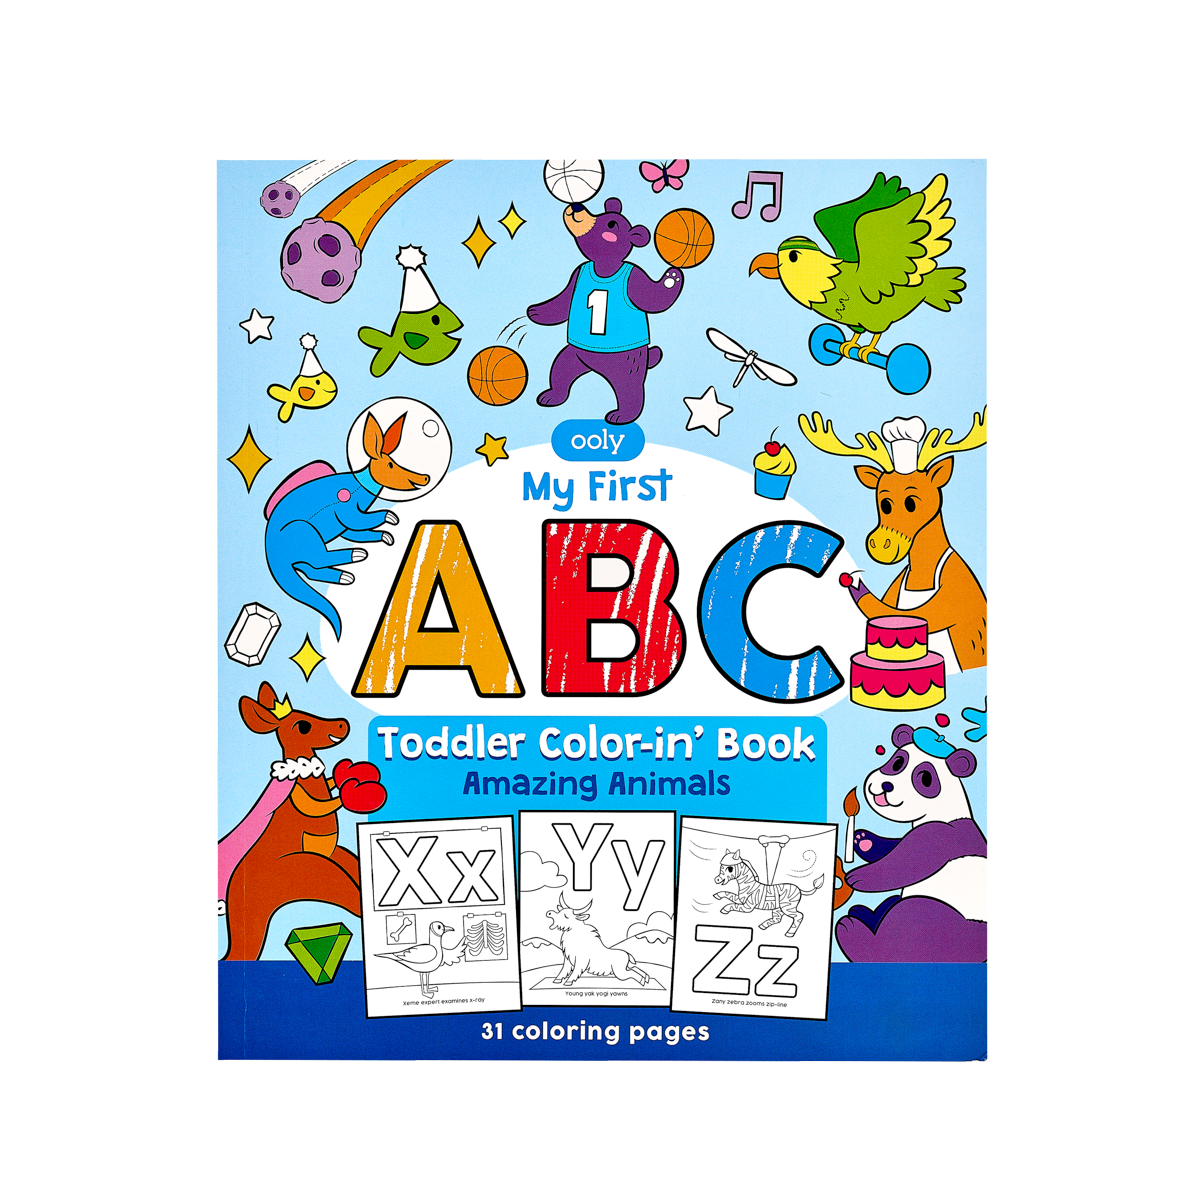 AR Coloring Book in USA | Colorful Birds | Magic Activity